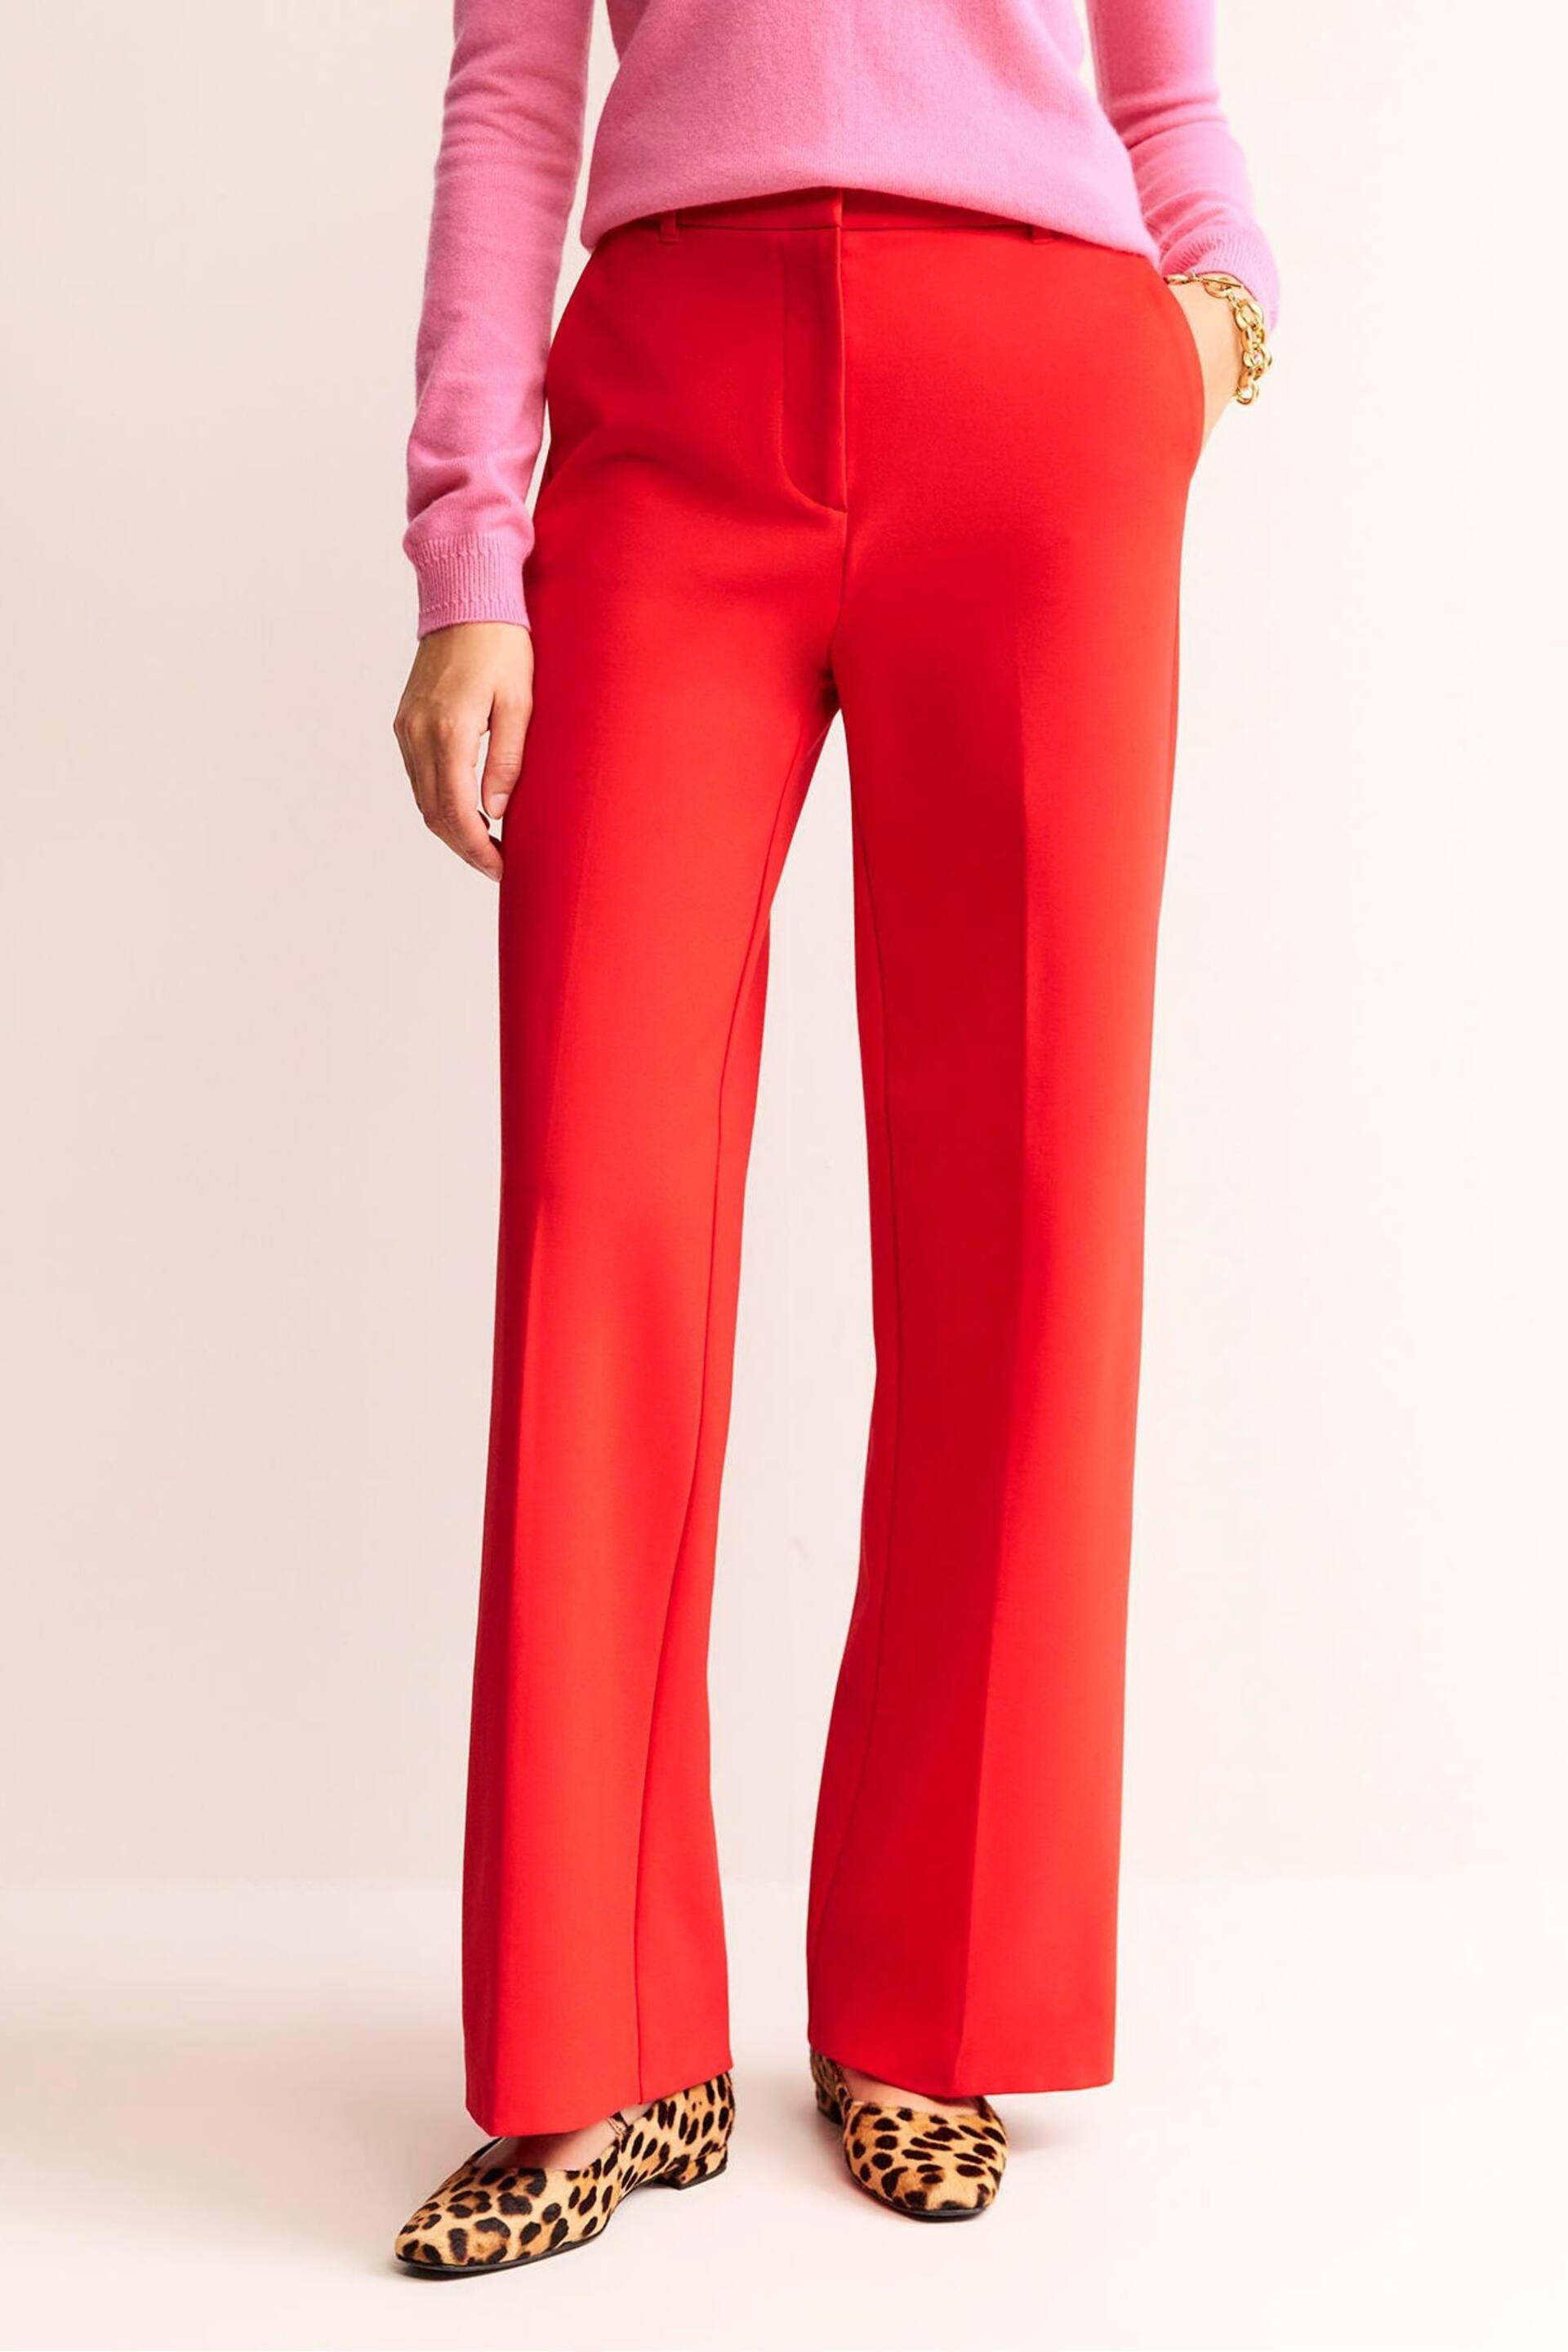 Boden Red Westbourne Ponte Trousers - Image 1 of 5